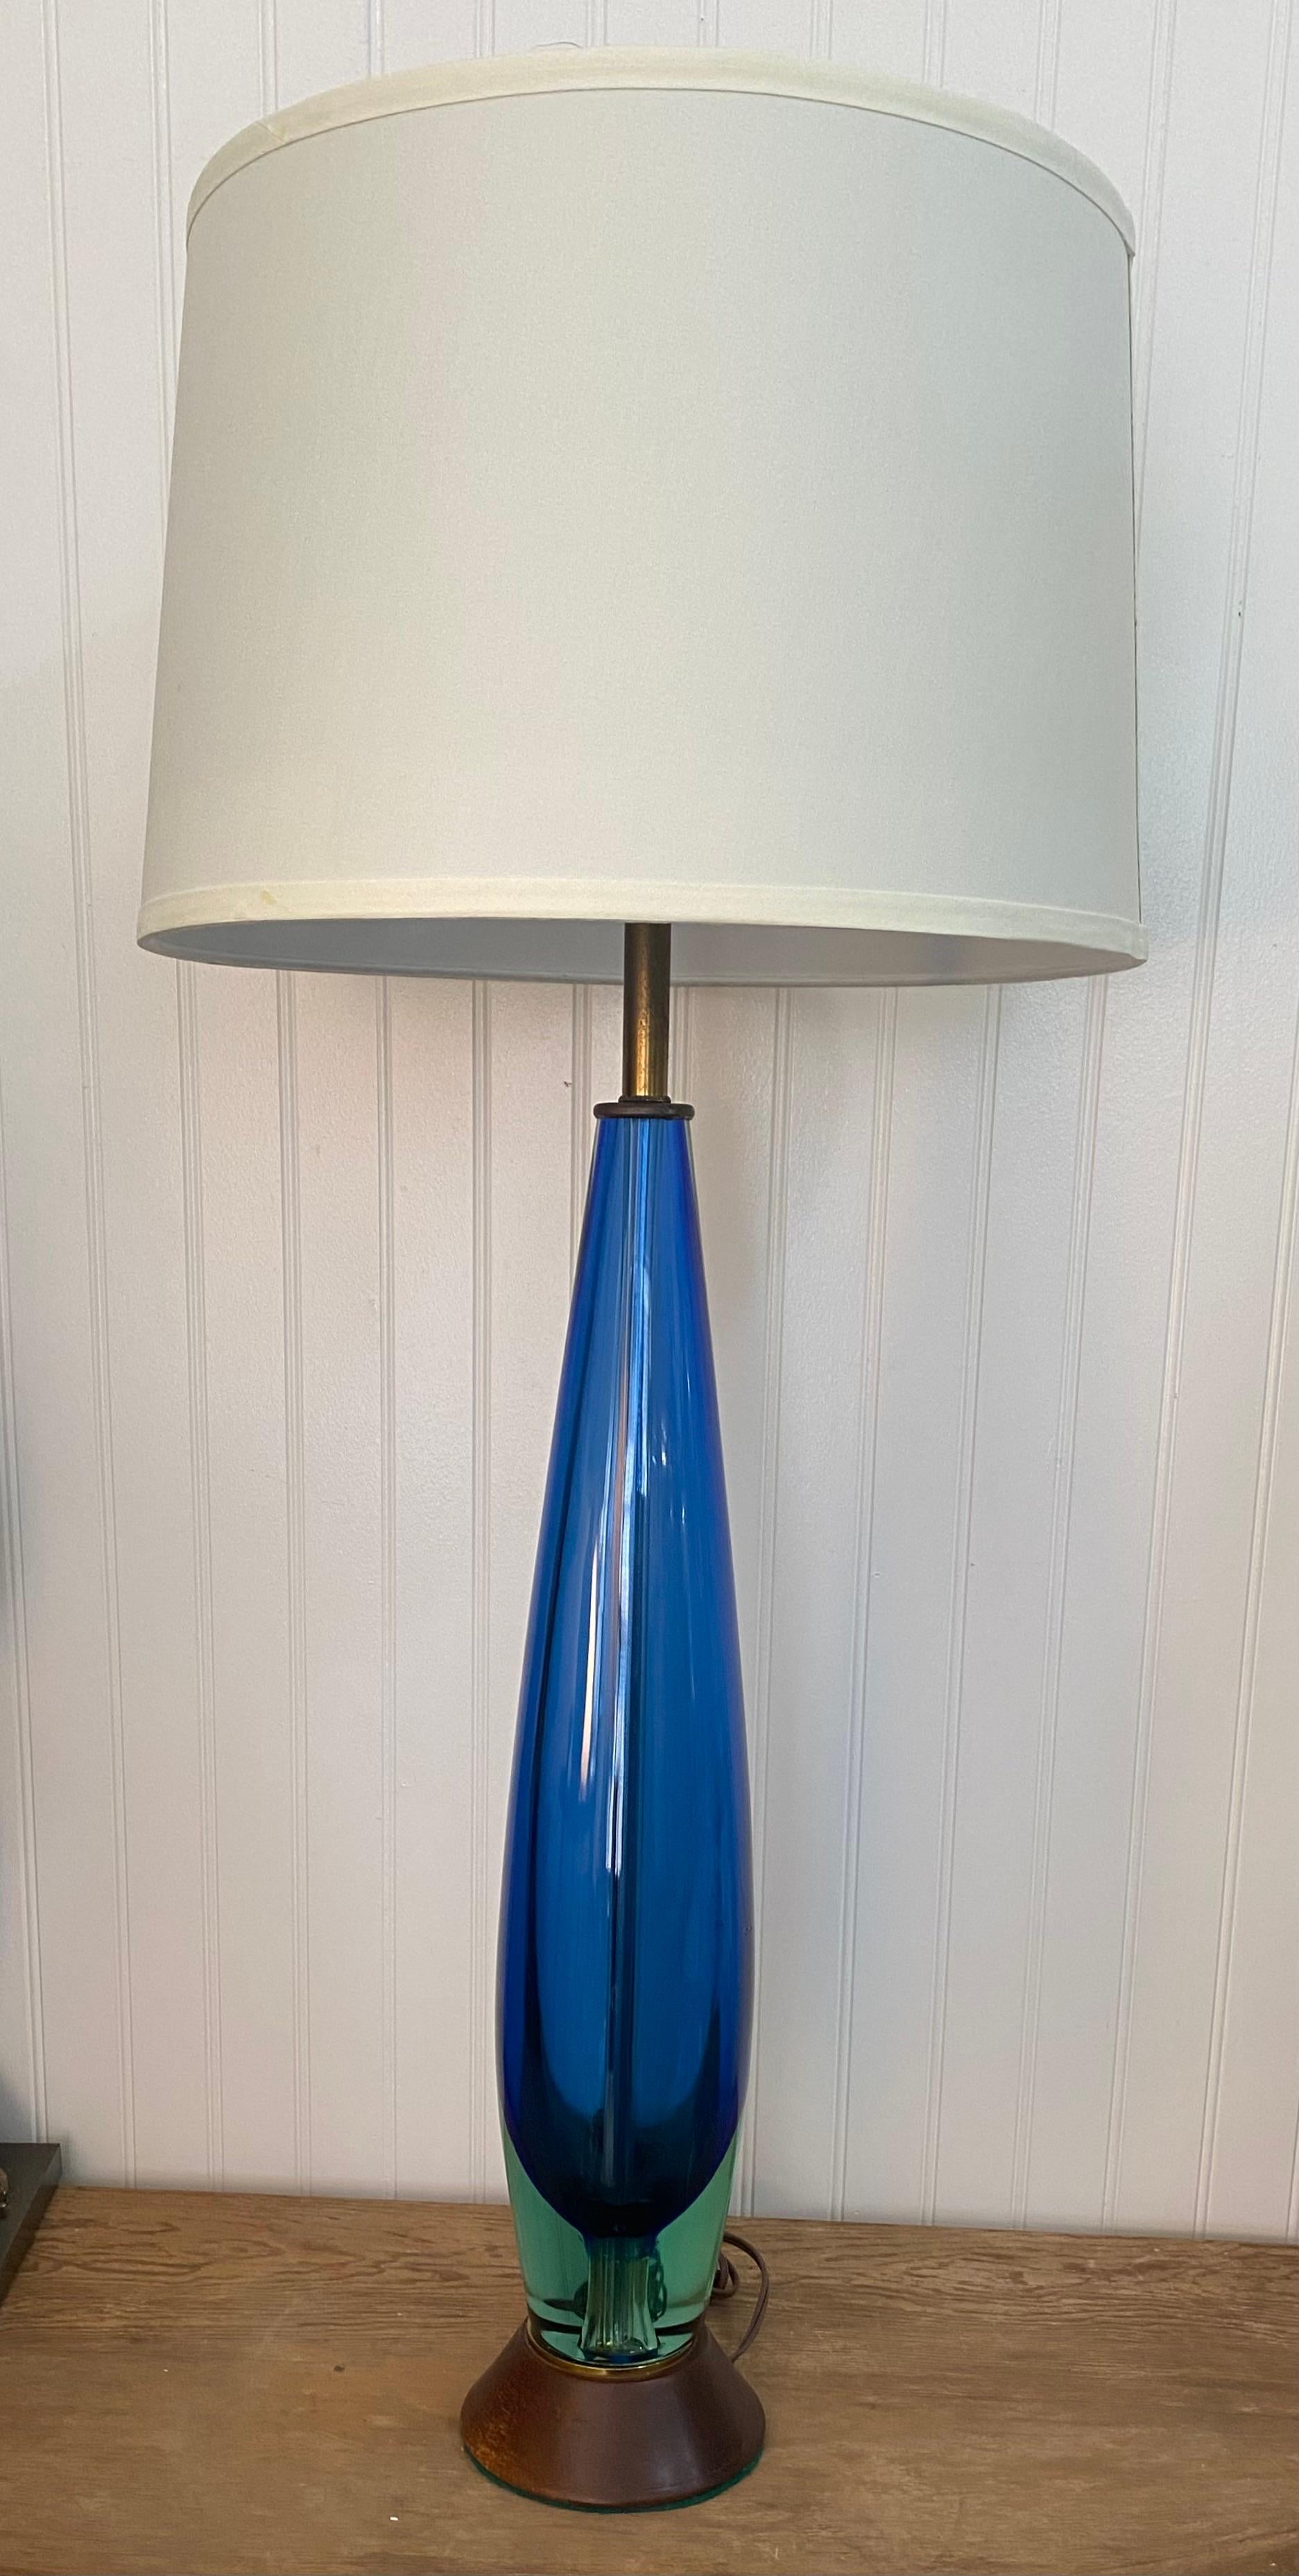 A fantastic pair of bulbous shaped table lamps designed by Flavio Poli and made by Seguso, Murano. Beautiful sommerso technique with green - blue - clear layers of glass. 

Height to top of glass is 24 inches plus 6.5 inches to top of bulb